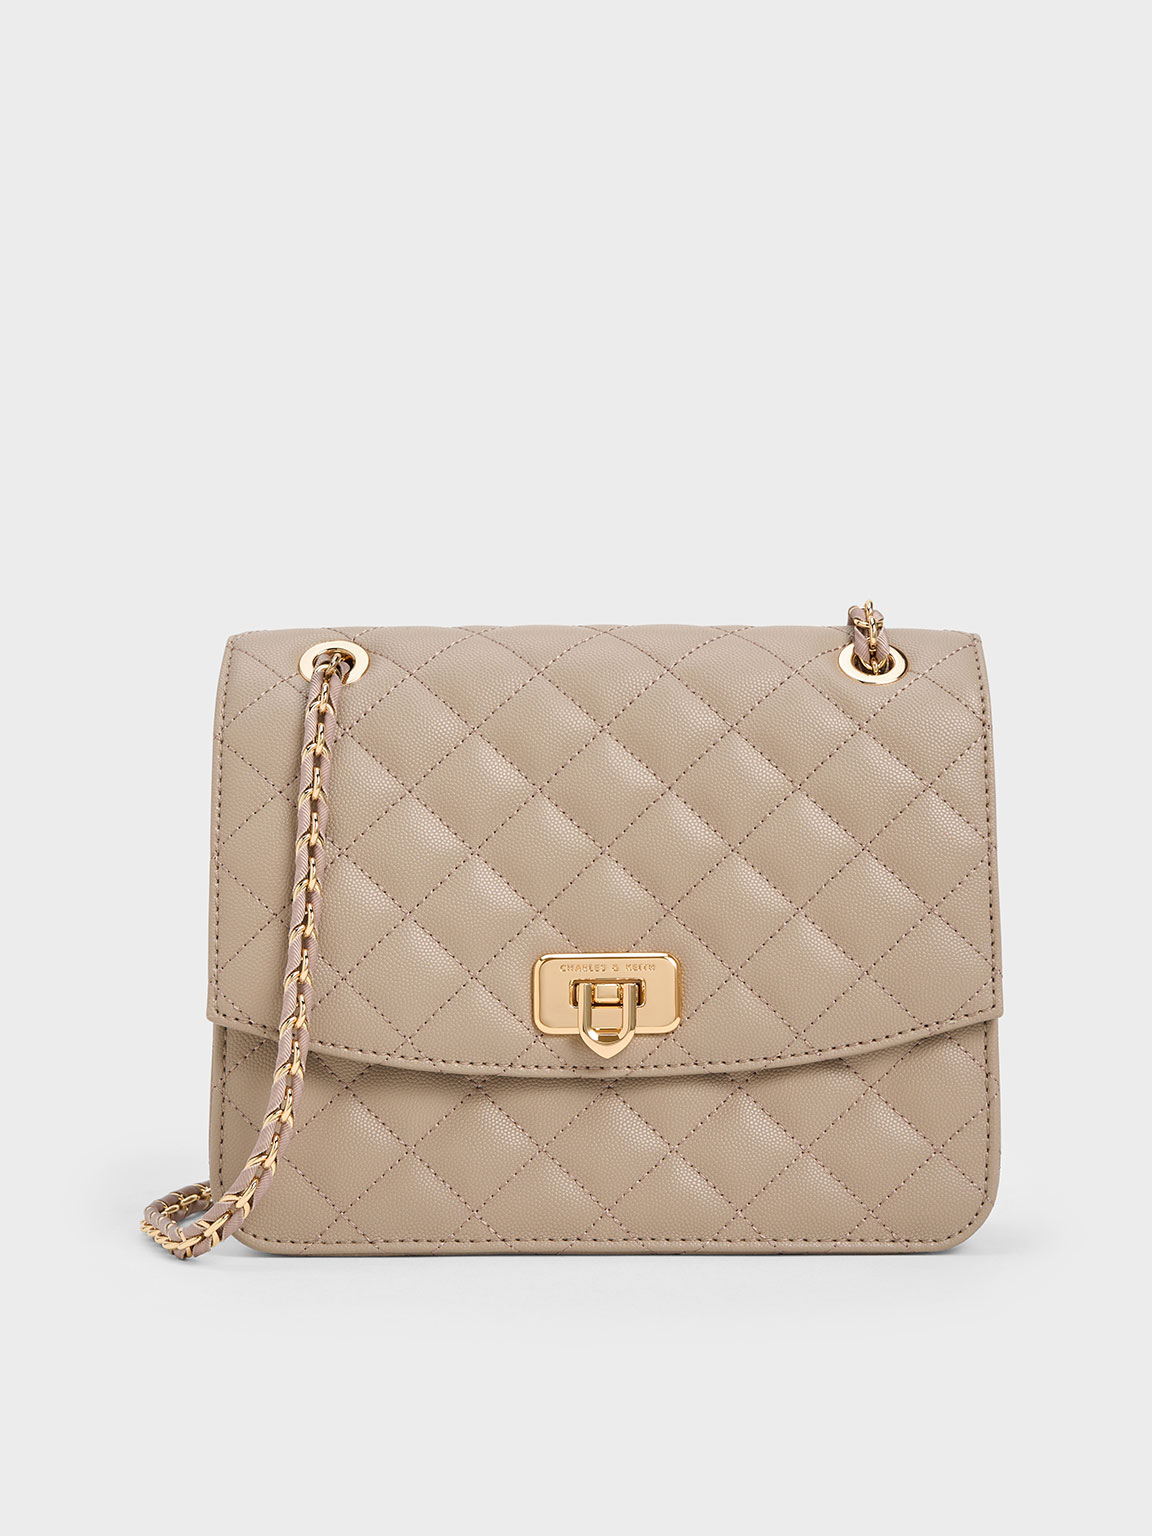 Taupe Cressida Quilted Chain Strap Bag - CHARLES & KEITH 